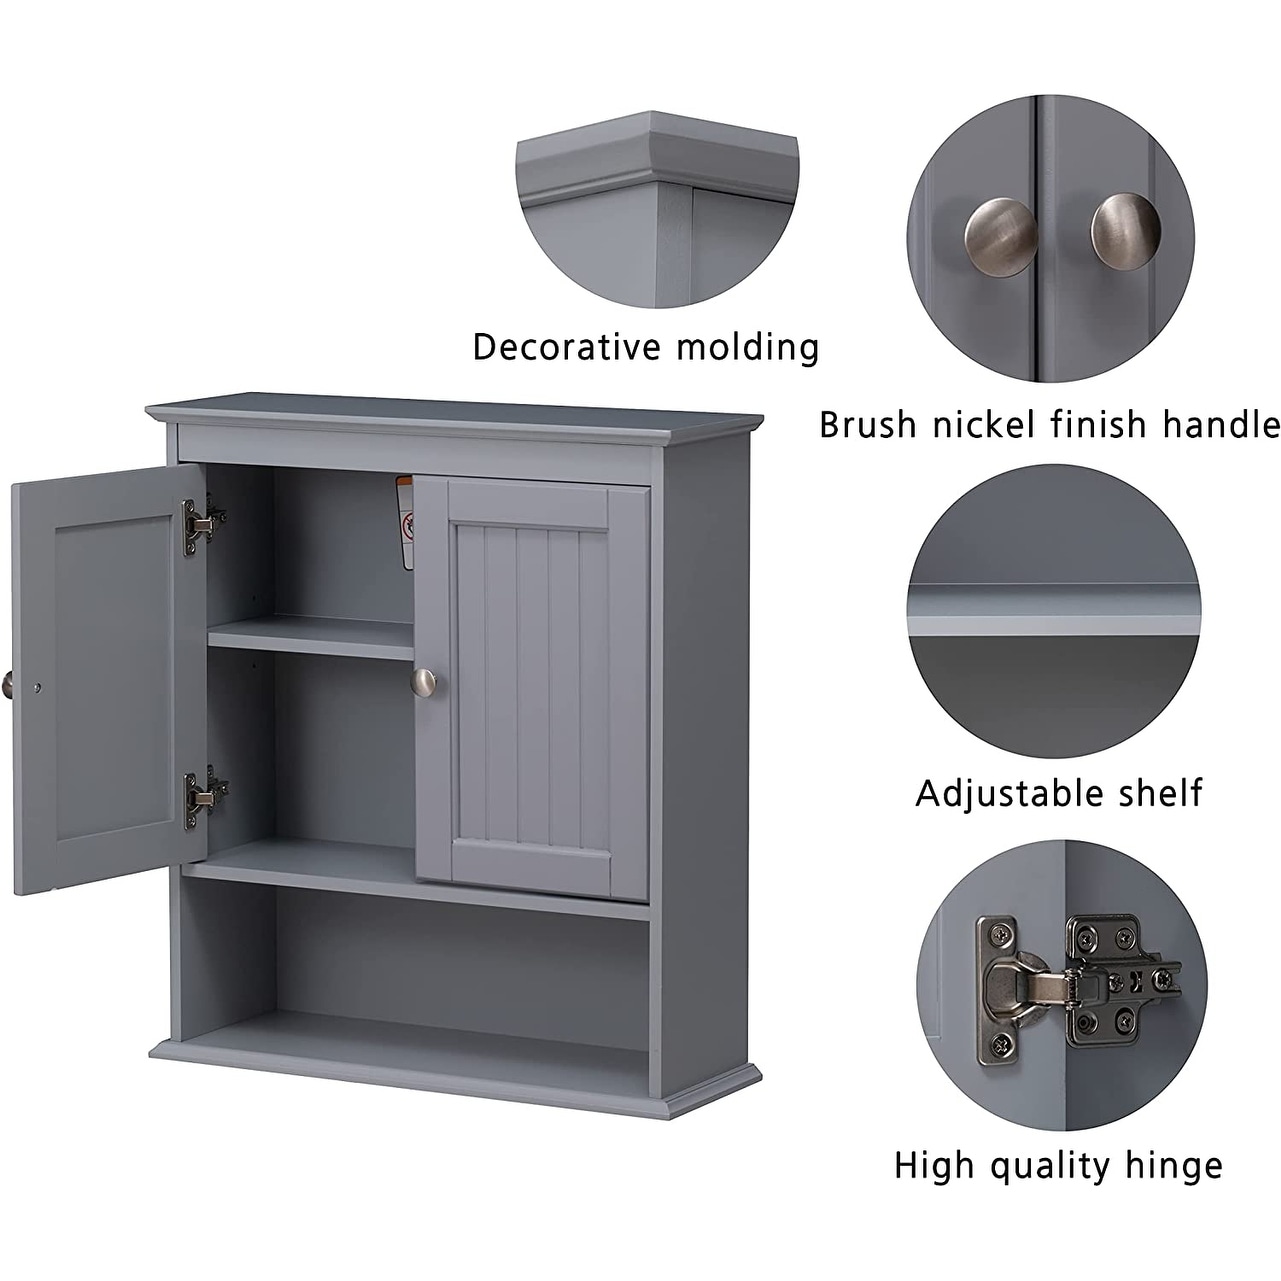 https://ak1.ostkcdn.com/images/products/is/images/direct/c14f38e0a19311370d50d46f148390d20498c342/Spirich-Bathroom-Wall-Spacesaver-Storage-Cabinet-Over-The-Toilet-with-Door-%2C-Wooden%2C-White.jpg